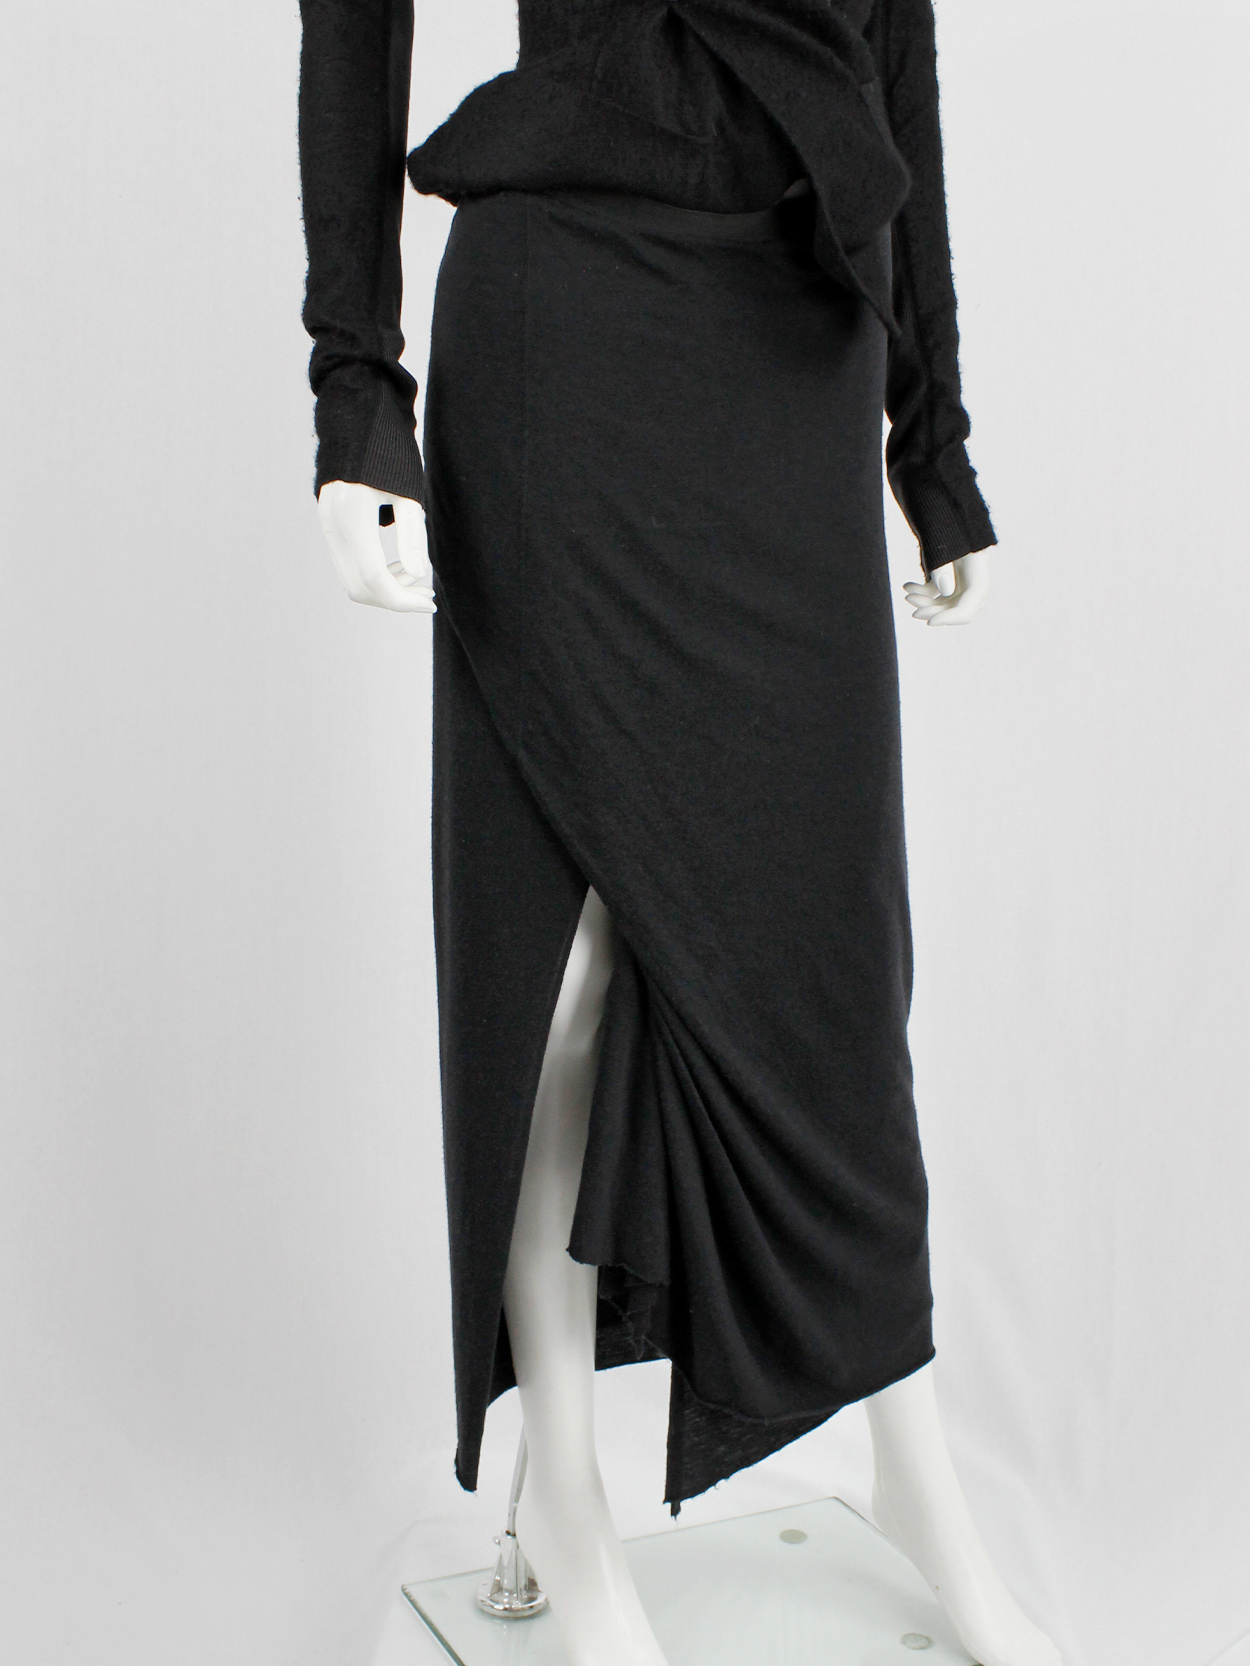 Rick Owens Lilies black maxi skirt with a slit created by a front drape ...